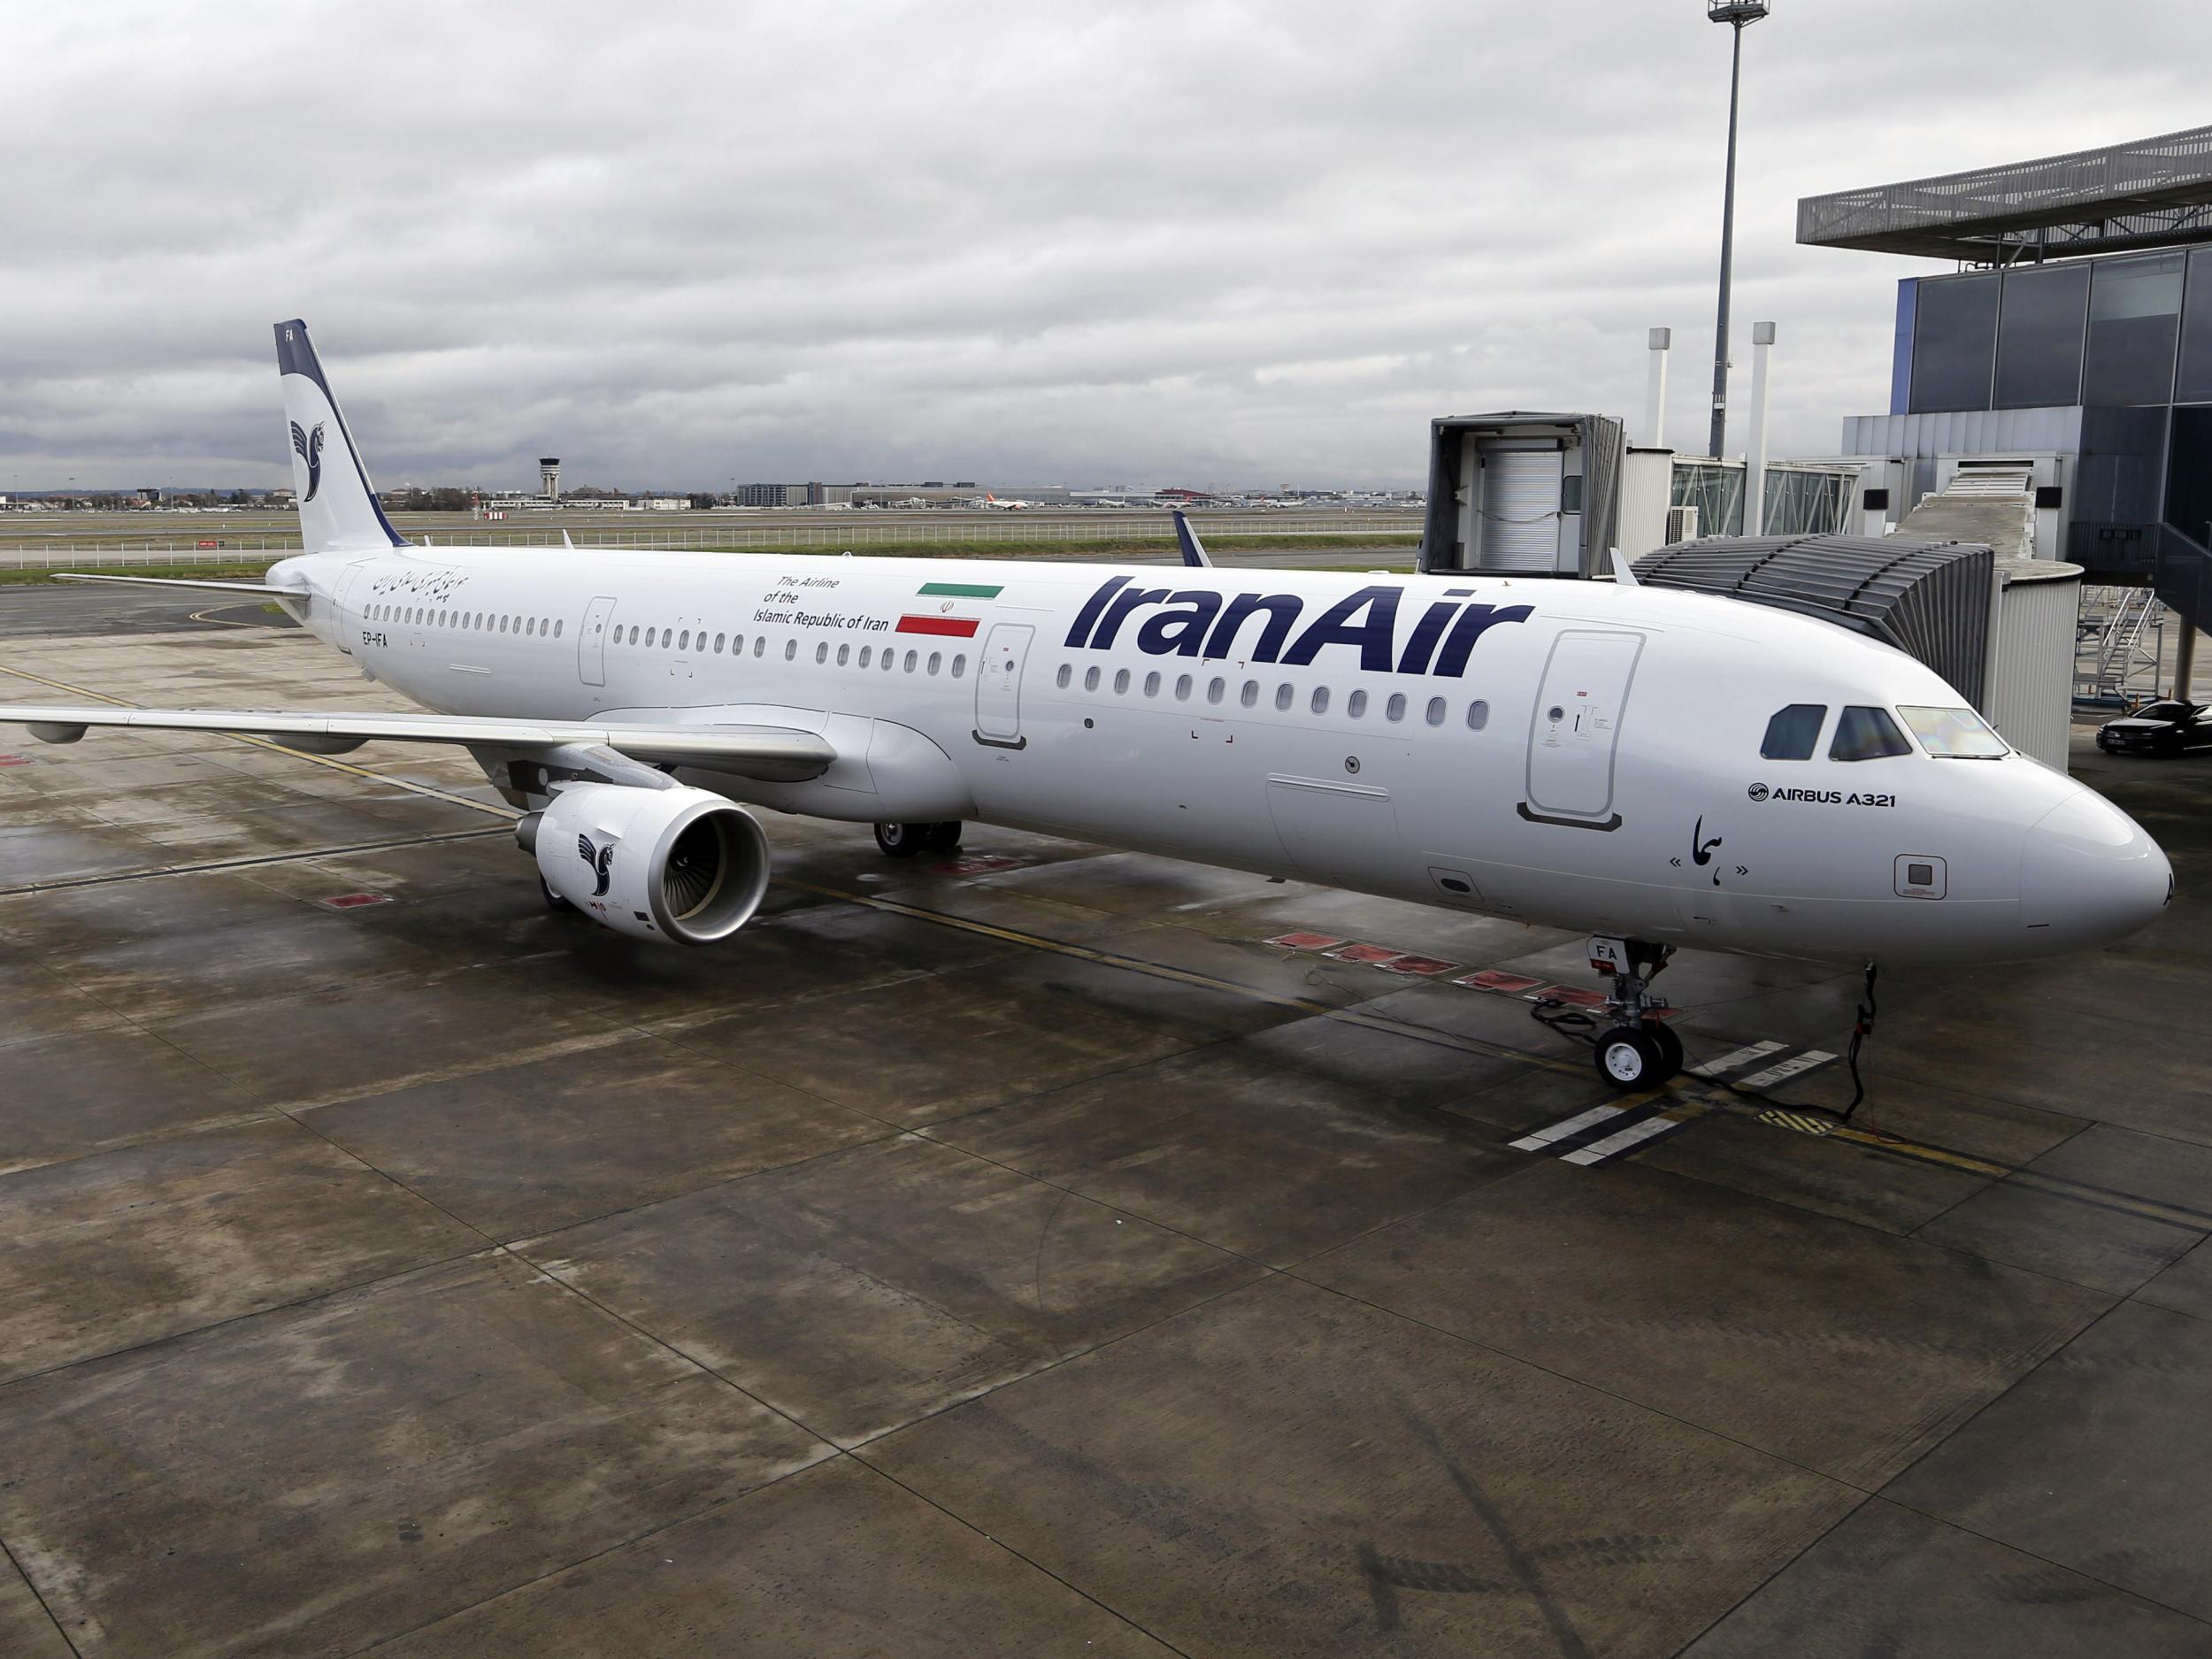 Iran is in the process of revamping its aging passenger fleet